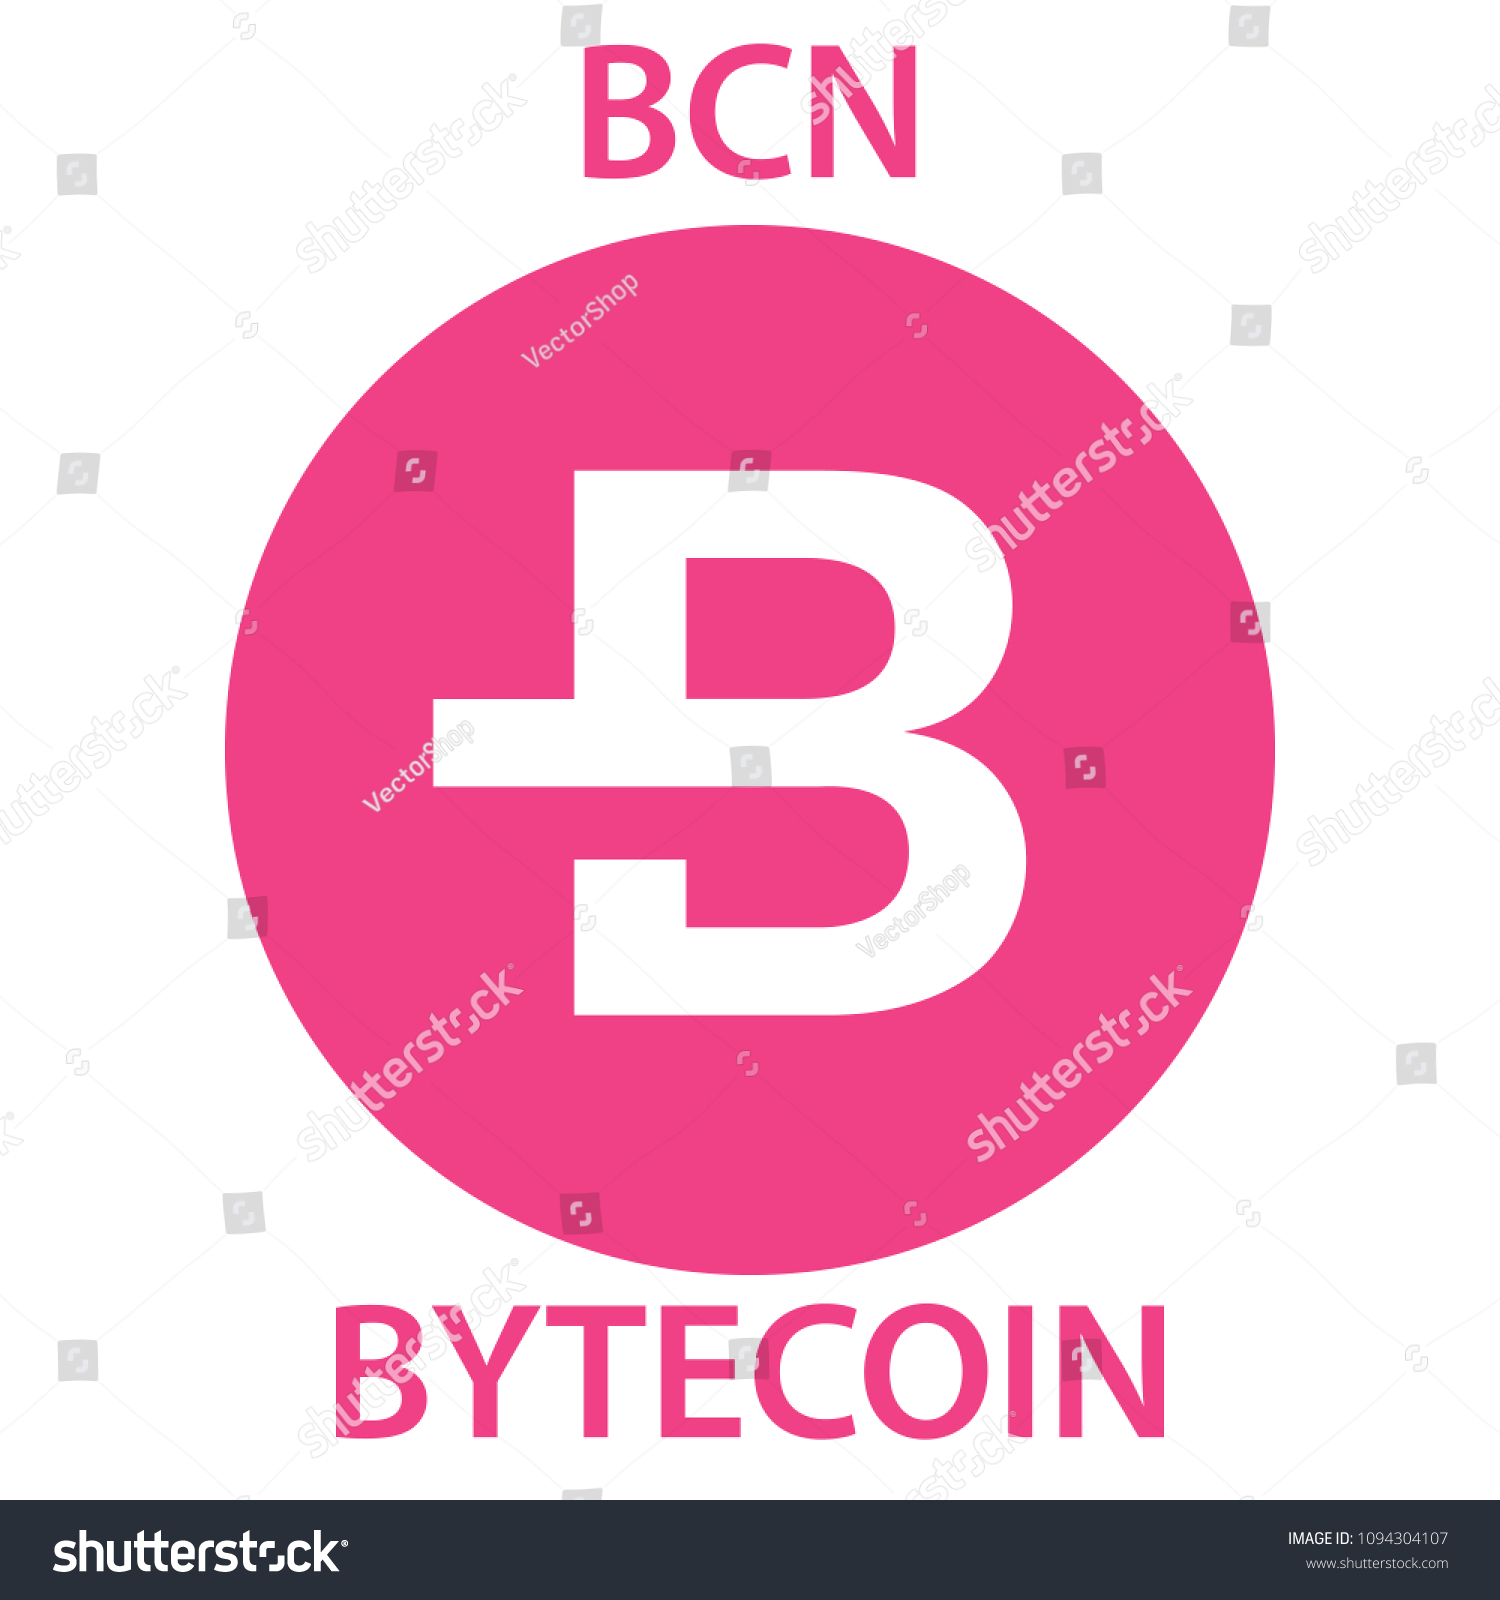 SVG of Bytecoin Coin cryptocurrency blockchain icon. Virtual electronic, internet money or cryptocoin symbol, logo svg